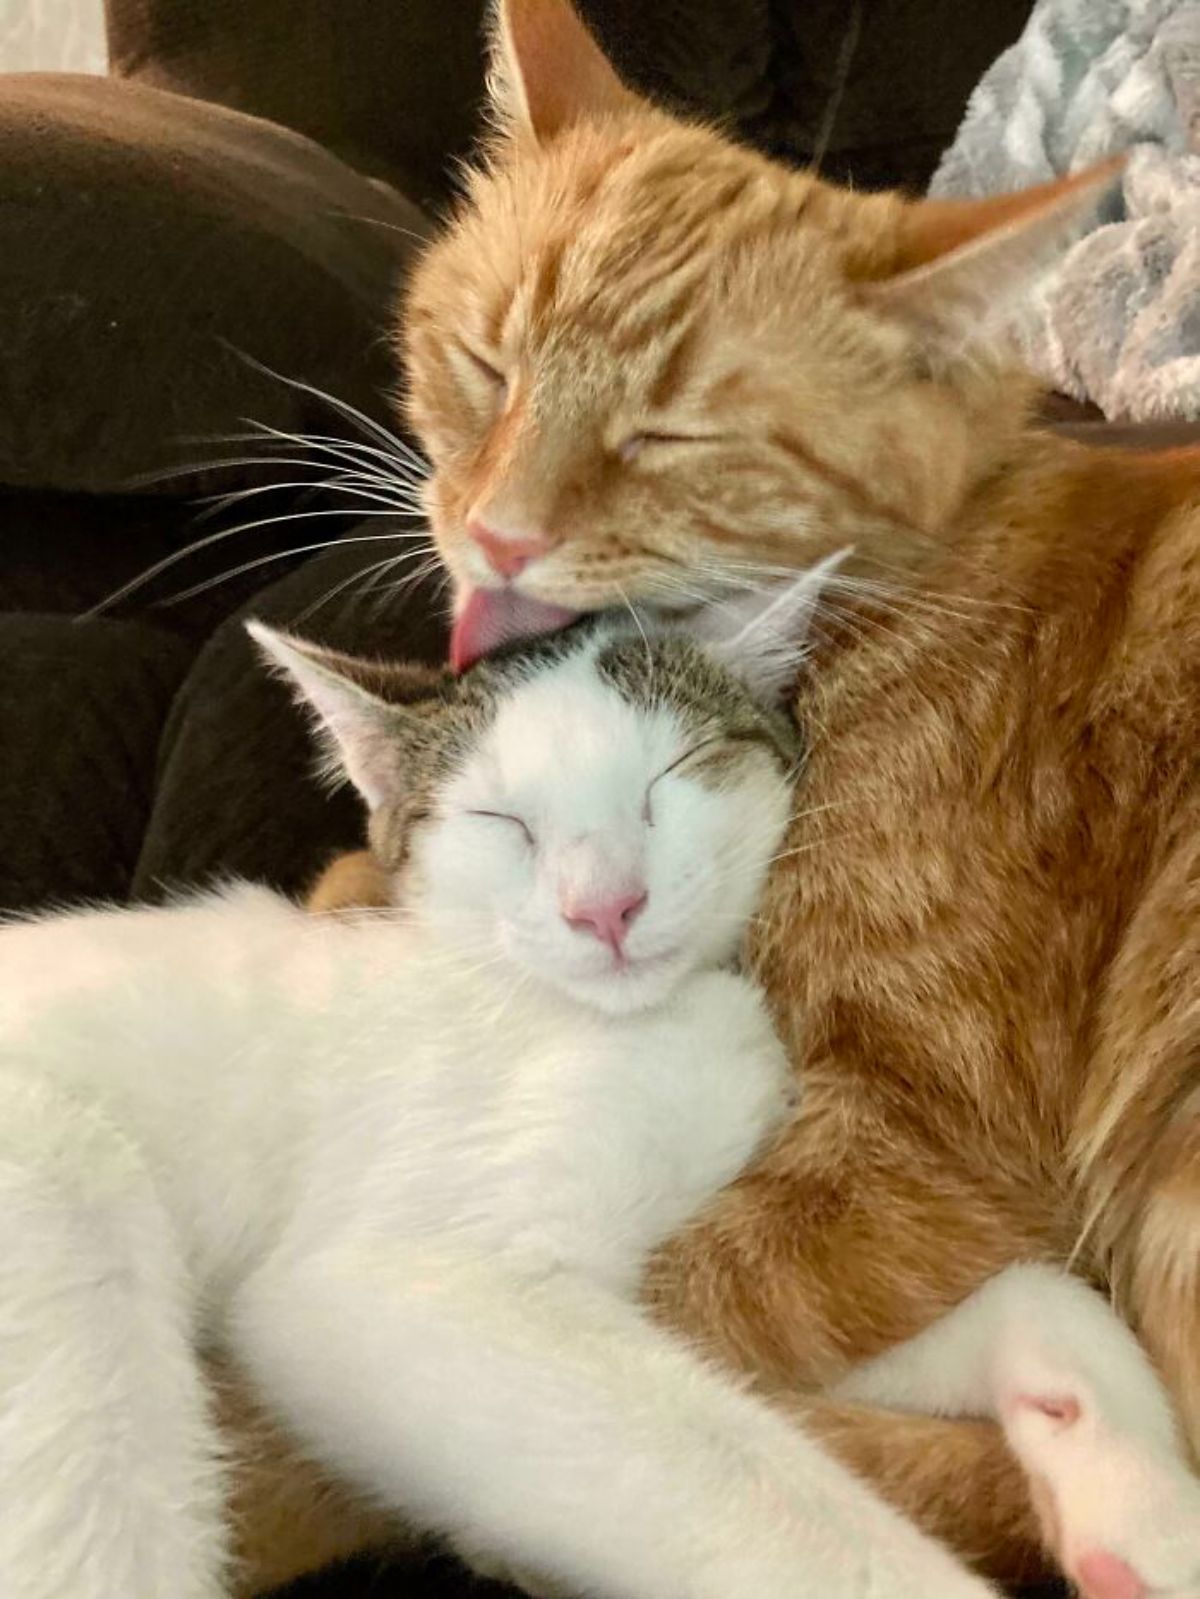 orange cat licking a white and grey cat